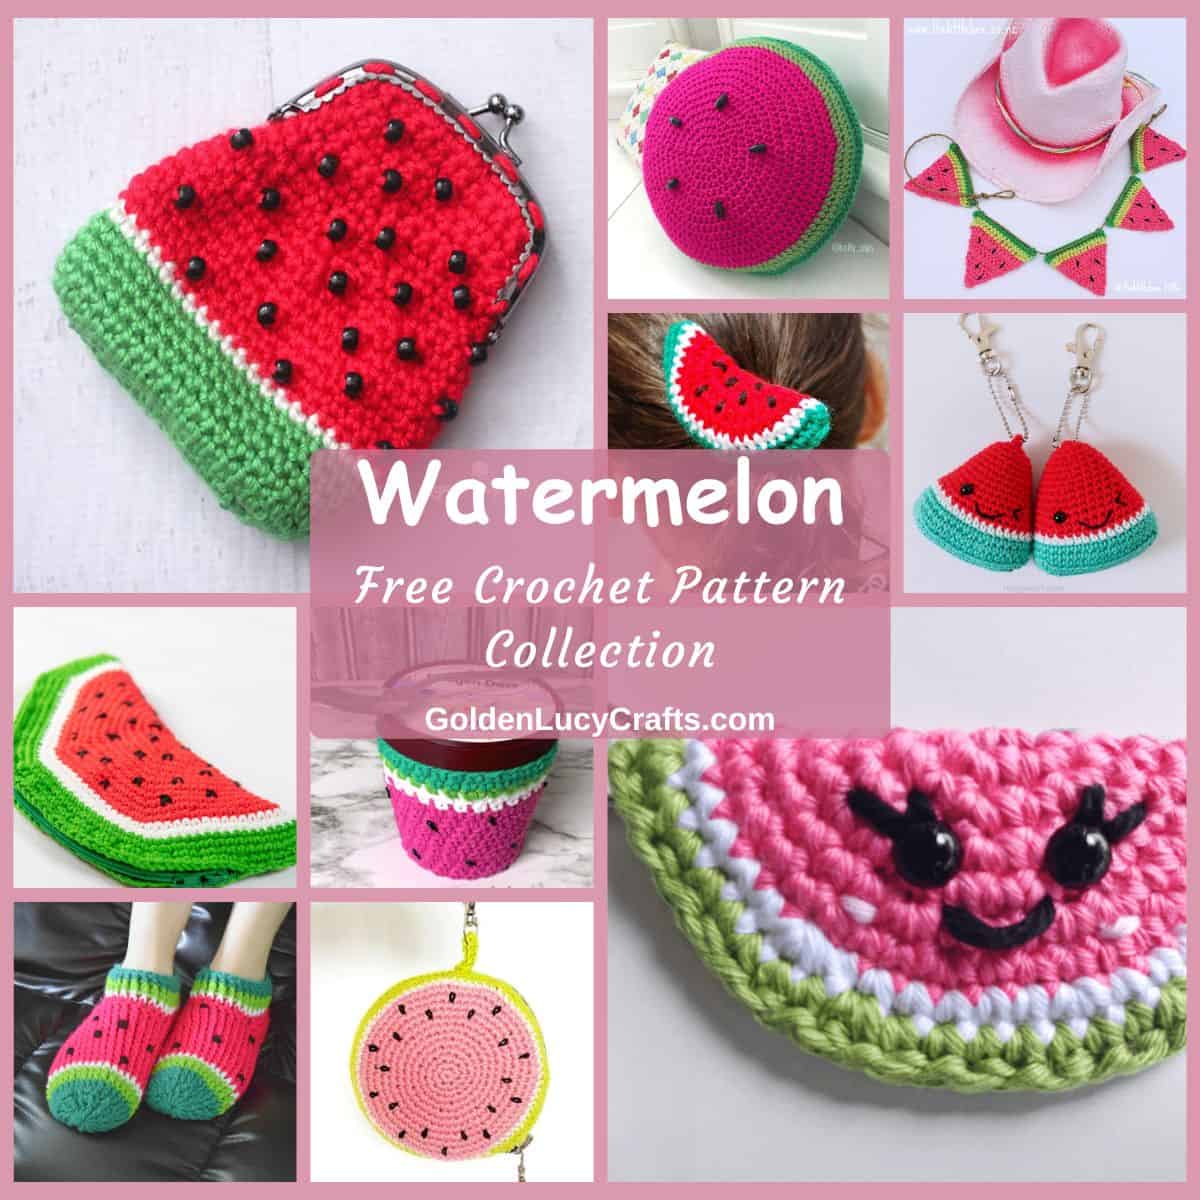 Photo collage of watermelon themed crocheted items.